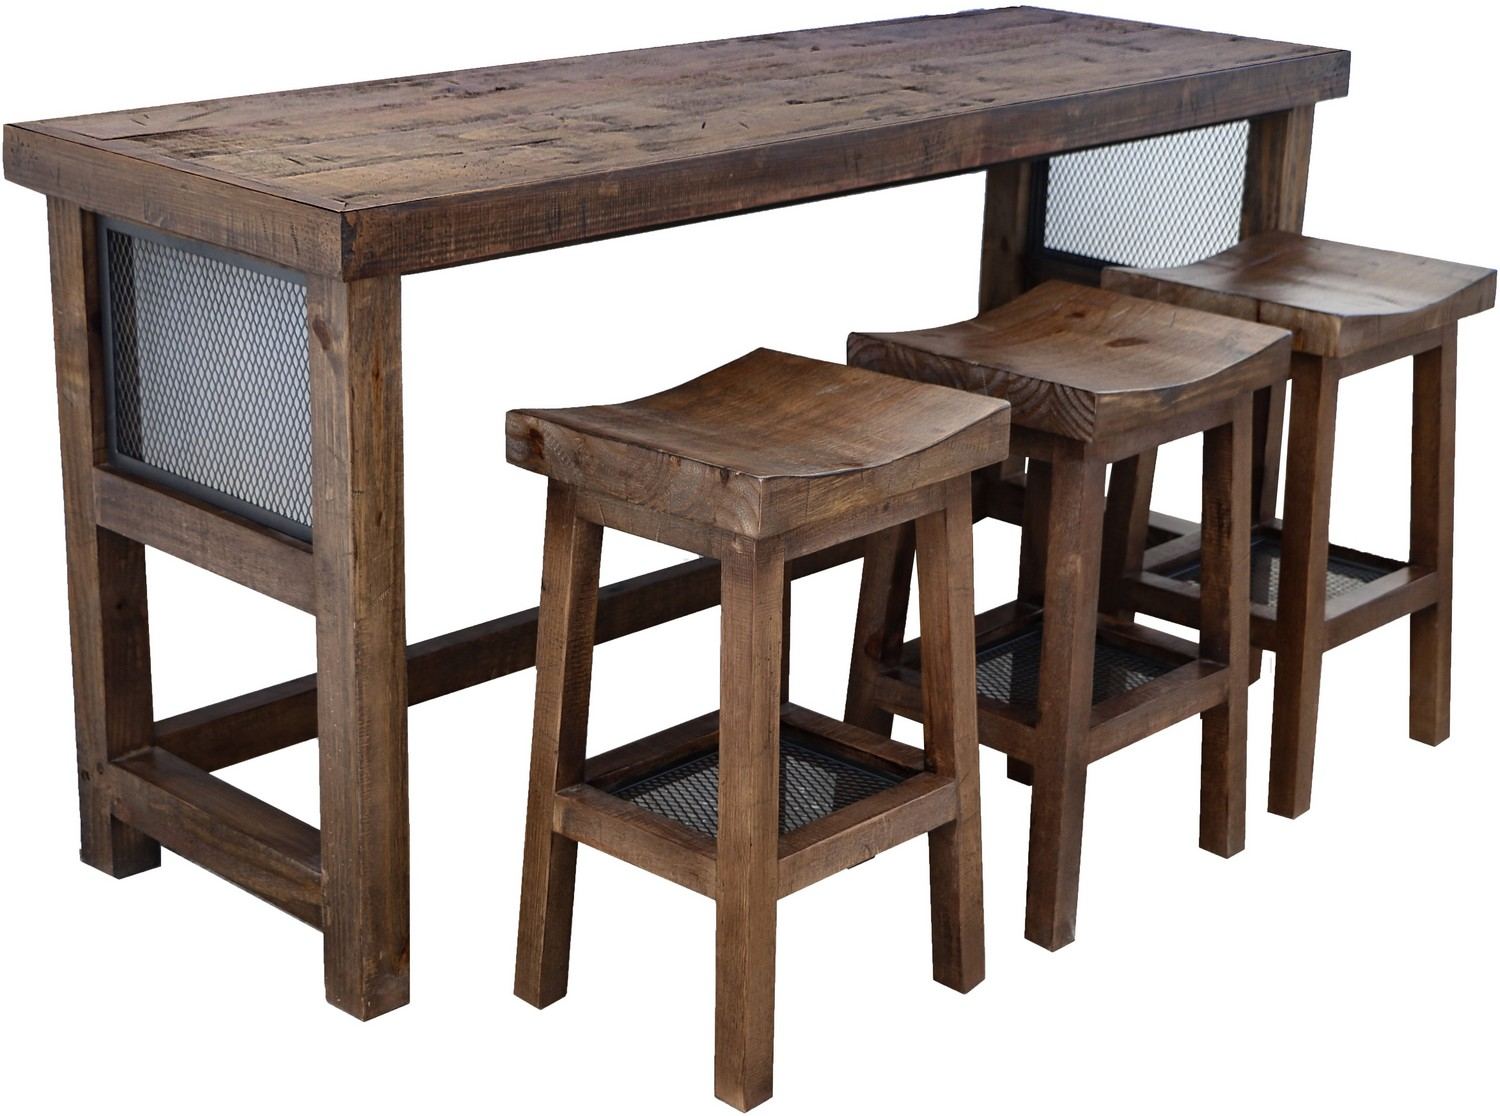 Parker House Lapaz Everywhere Console with 3 Stools - Rustic Worn Pine